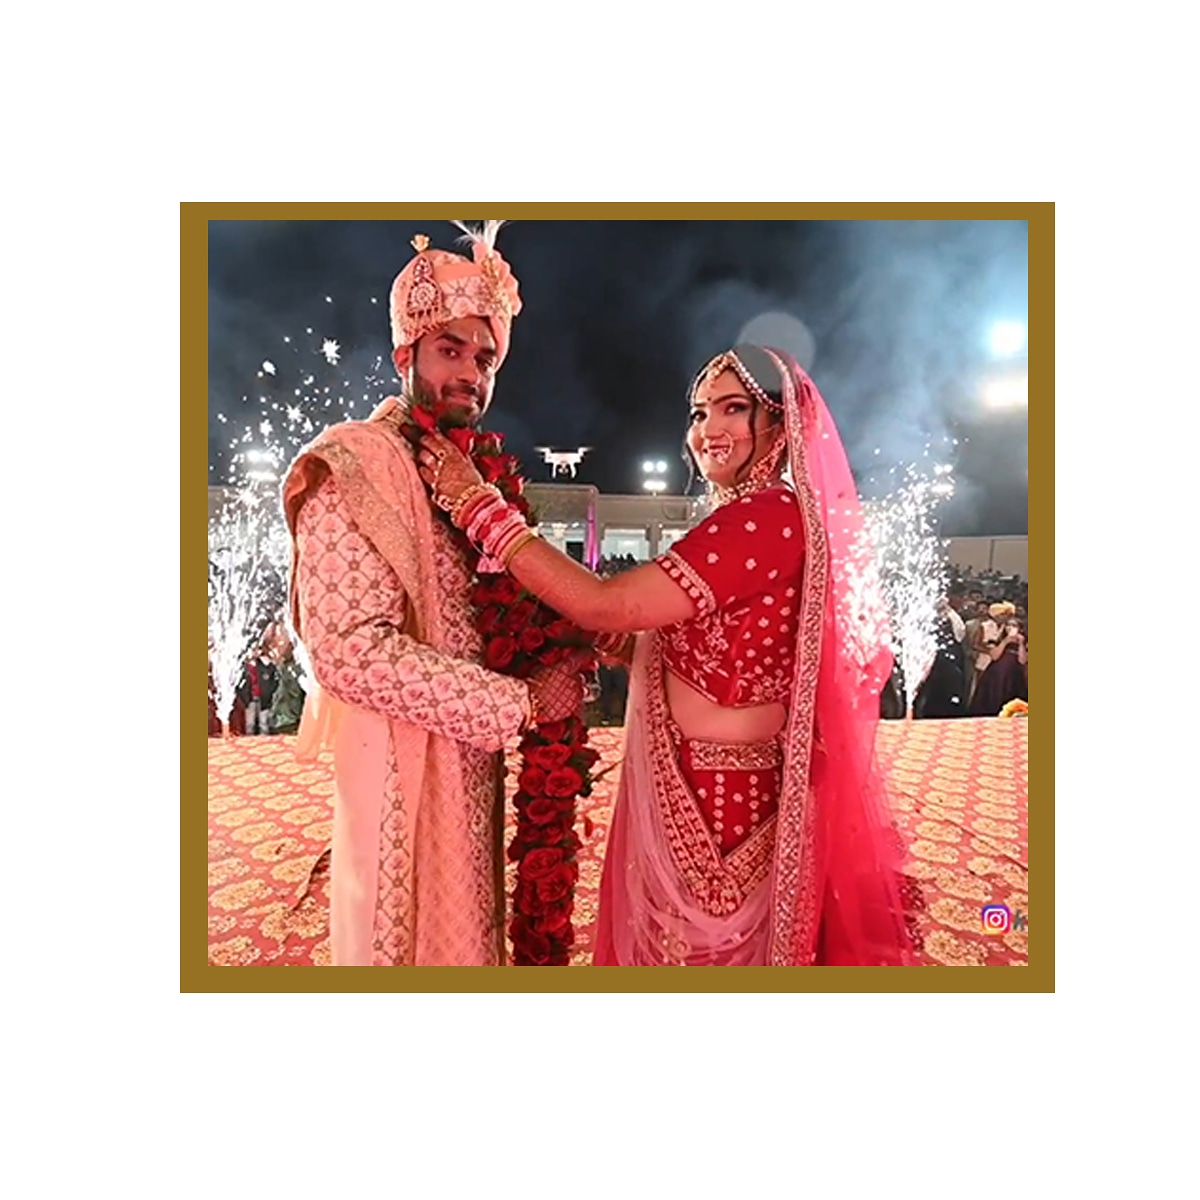 Wedding couples😍
The best and most beautiful things in this world cannot be seen or even heard, but must be felt with the heart.🥰😍
Rahul Weds Astha

#rajasthani #rajasthaniwedding #rajasthaniculture #weddingphotography #weddingday #weddingmoments #weddingsutra #weddingplanners